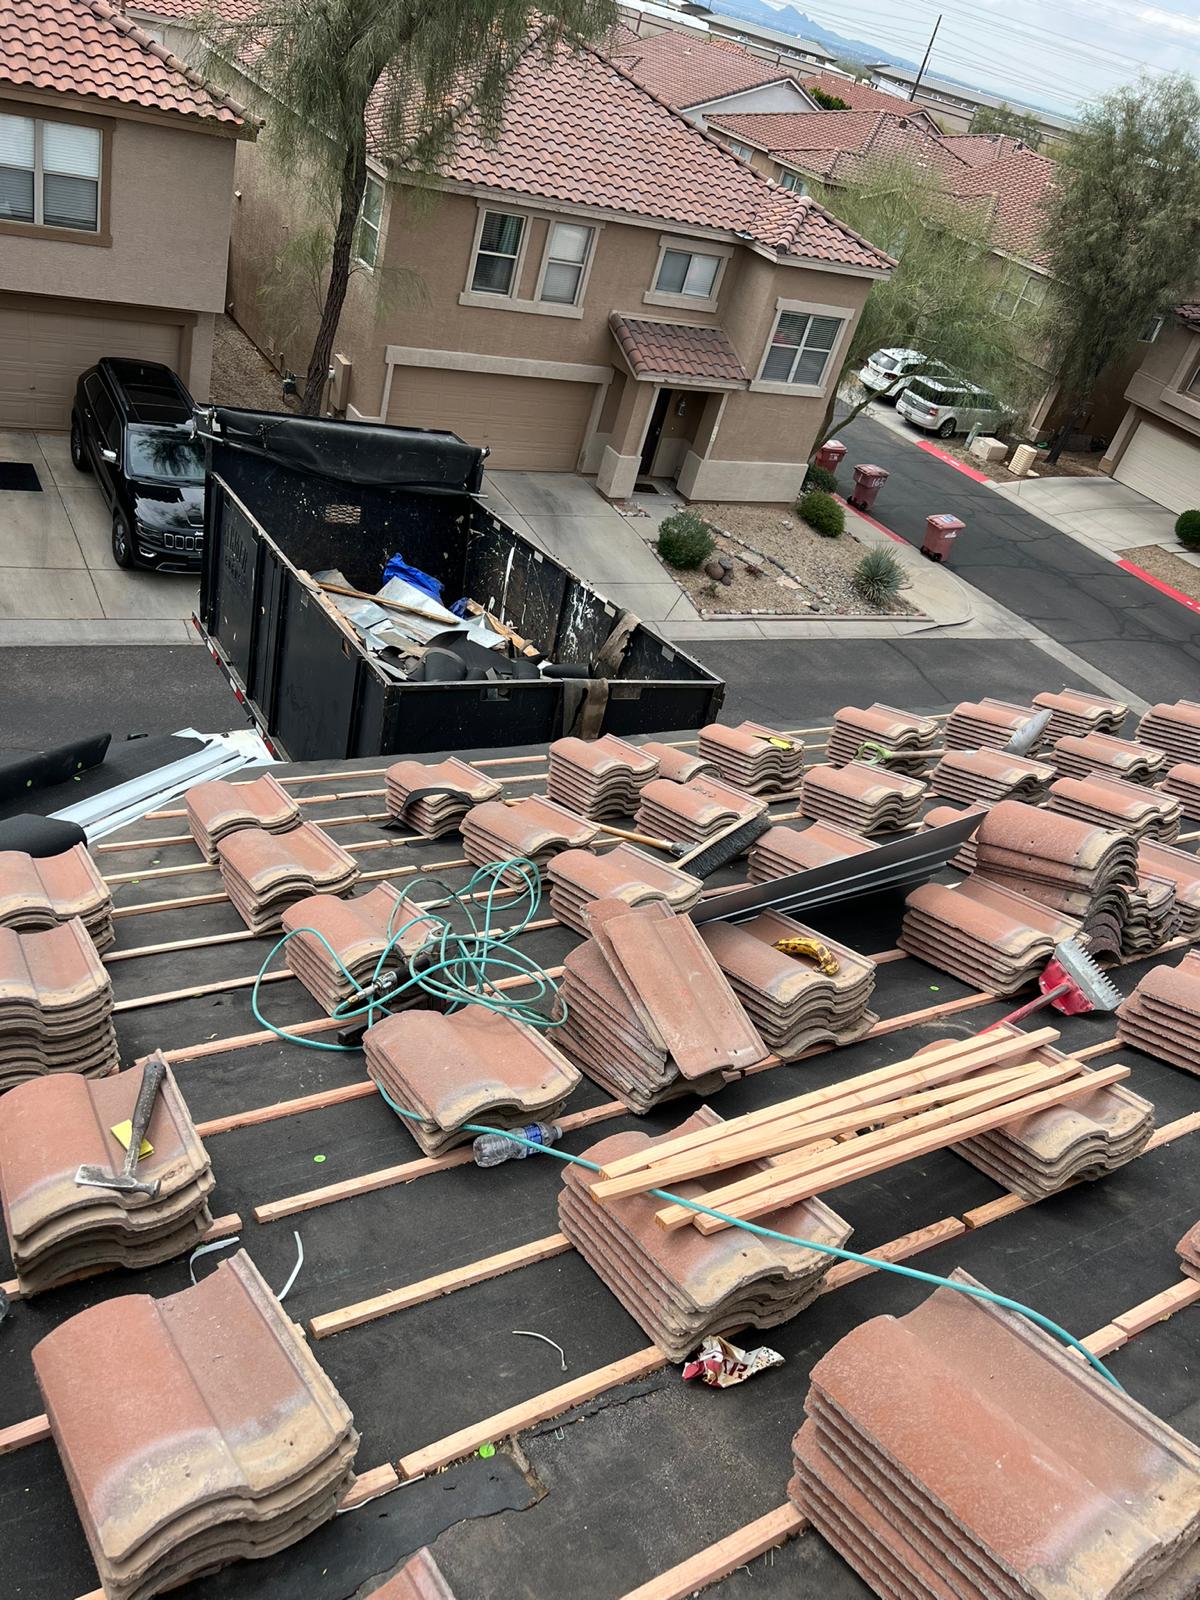 Behmer Roofing's materials for tile re-felting, organized and ready in Ironwood Village.